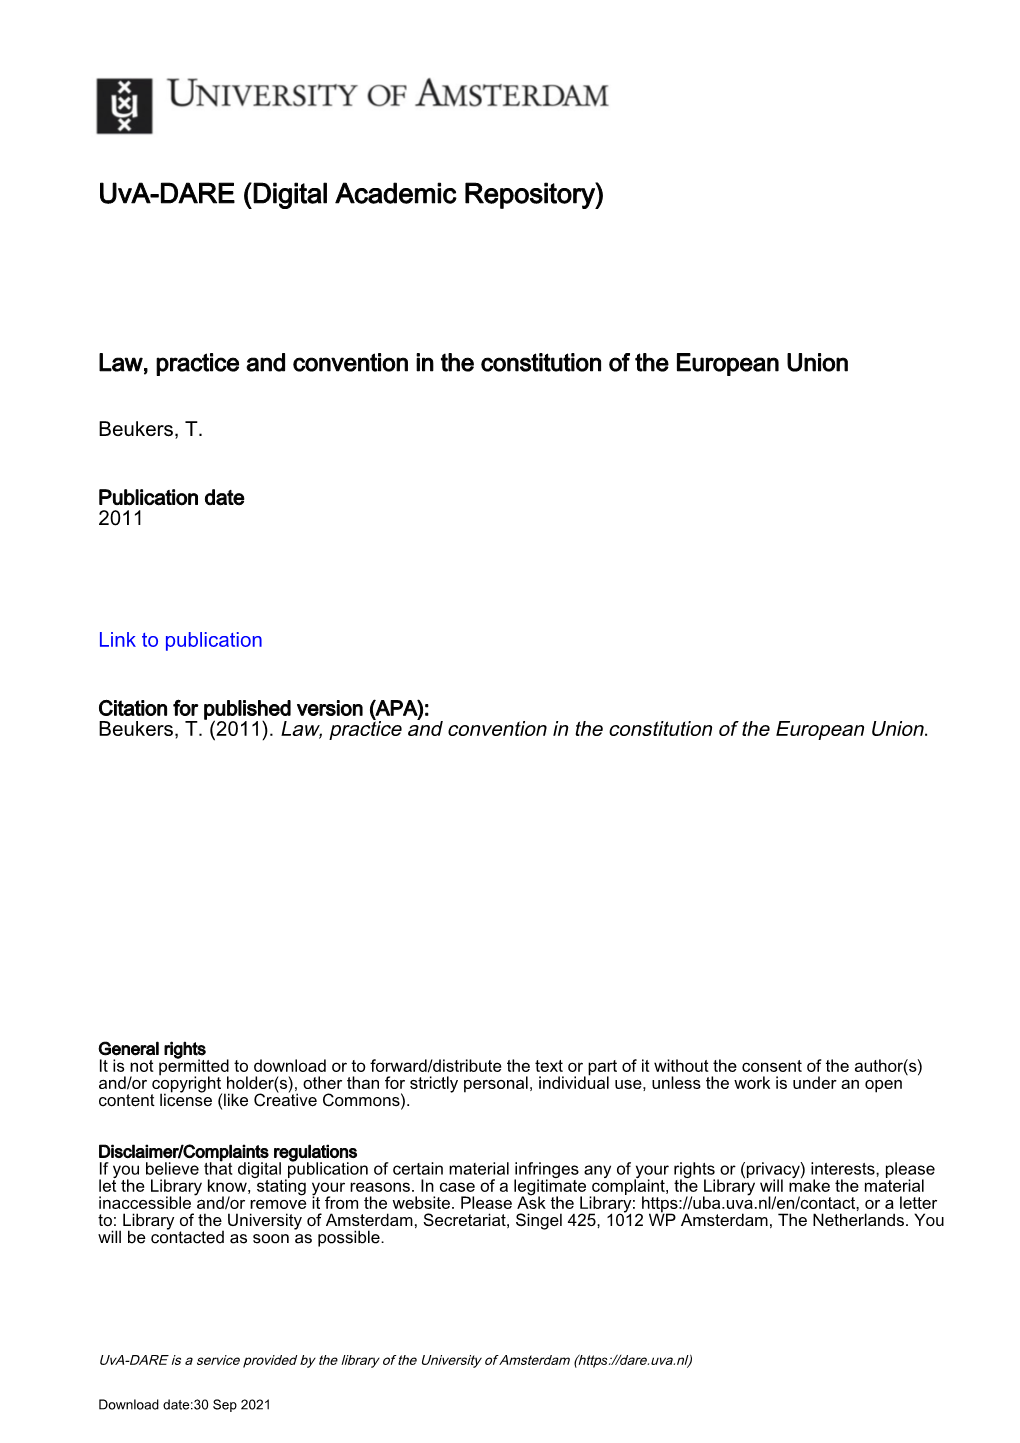 Law, Practice and Convention in the Constitution of the European Union